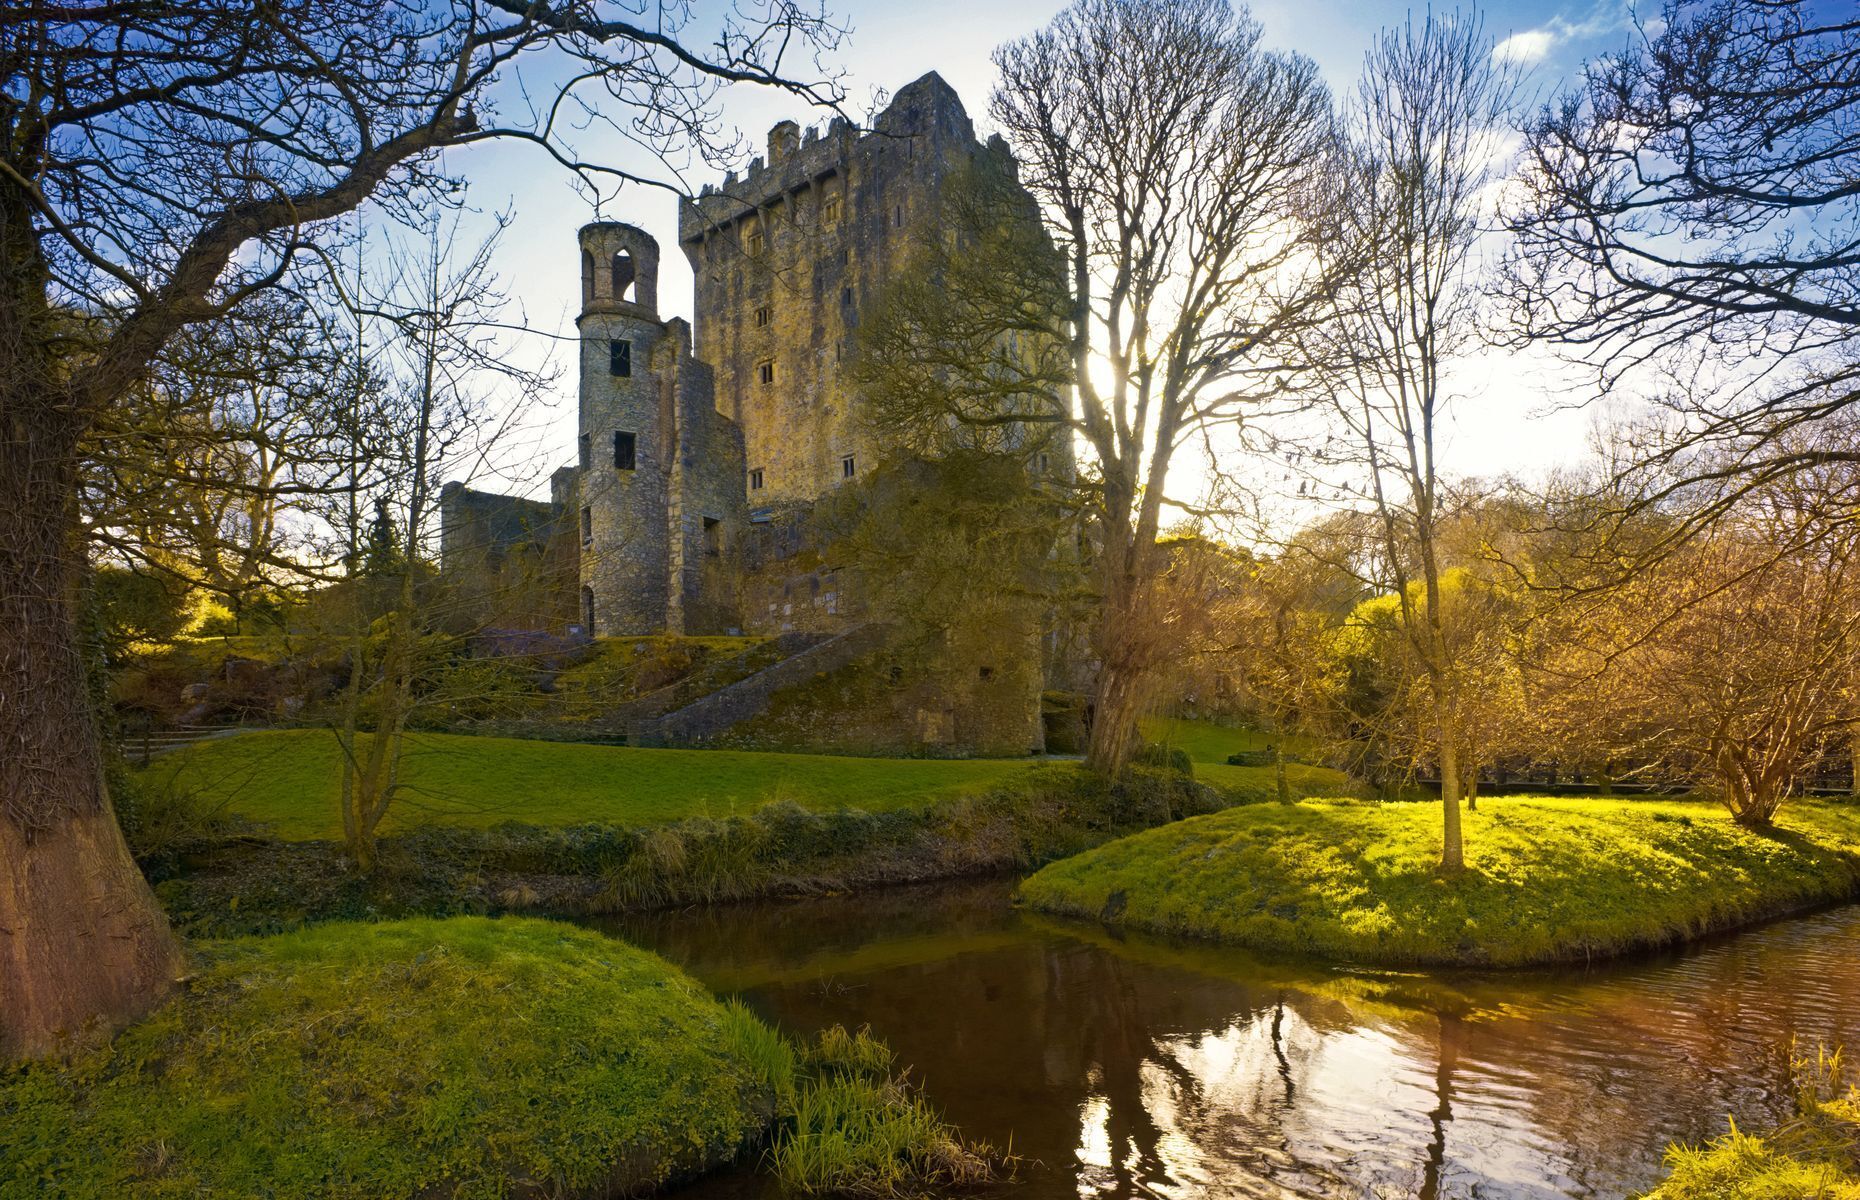 <p>Located atop a tower on a castle of the same name, the <a href="https://blarneycastle.ie/pages/kiss-the-blarney-stone" rel="noreferrer noopener">Blarney Stone</a> is among the most popular attractions in Ireland. An ancient legend claims that a gift of eloquence is bestowed on all those who kiss it with their head upside down. This myth has been attracting crowds for more than 600 years.</p>